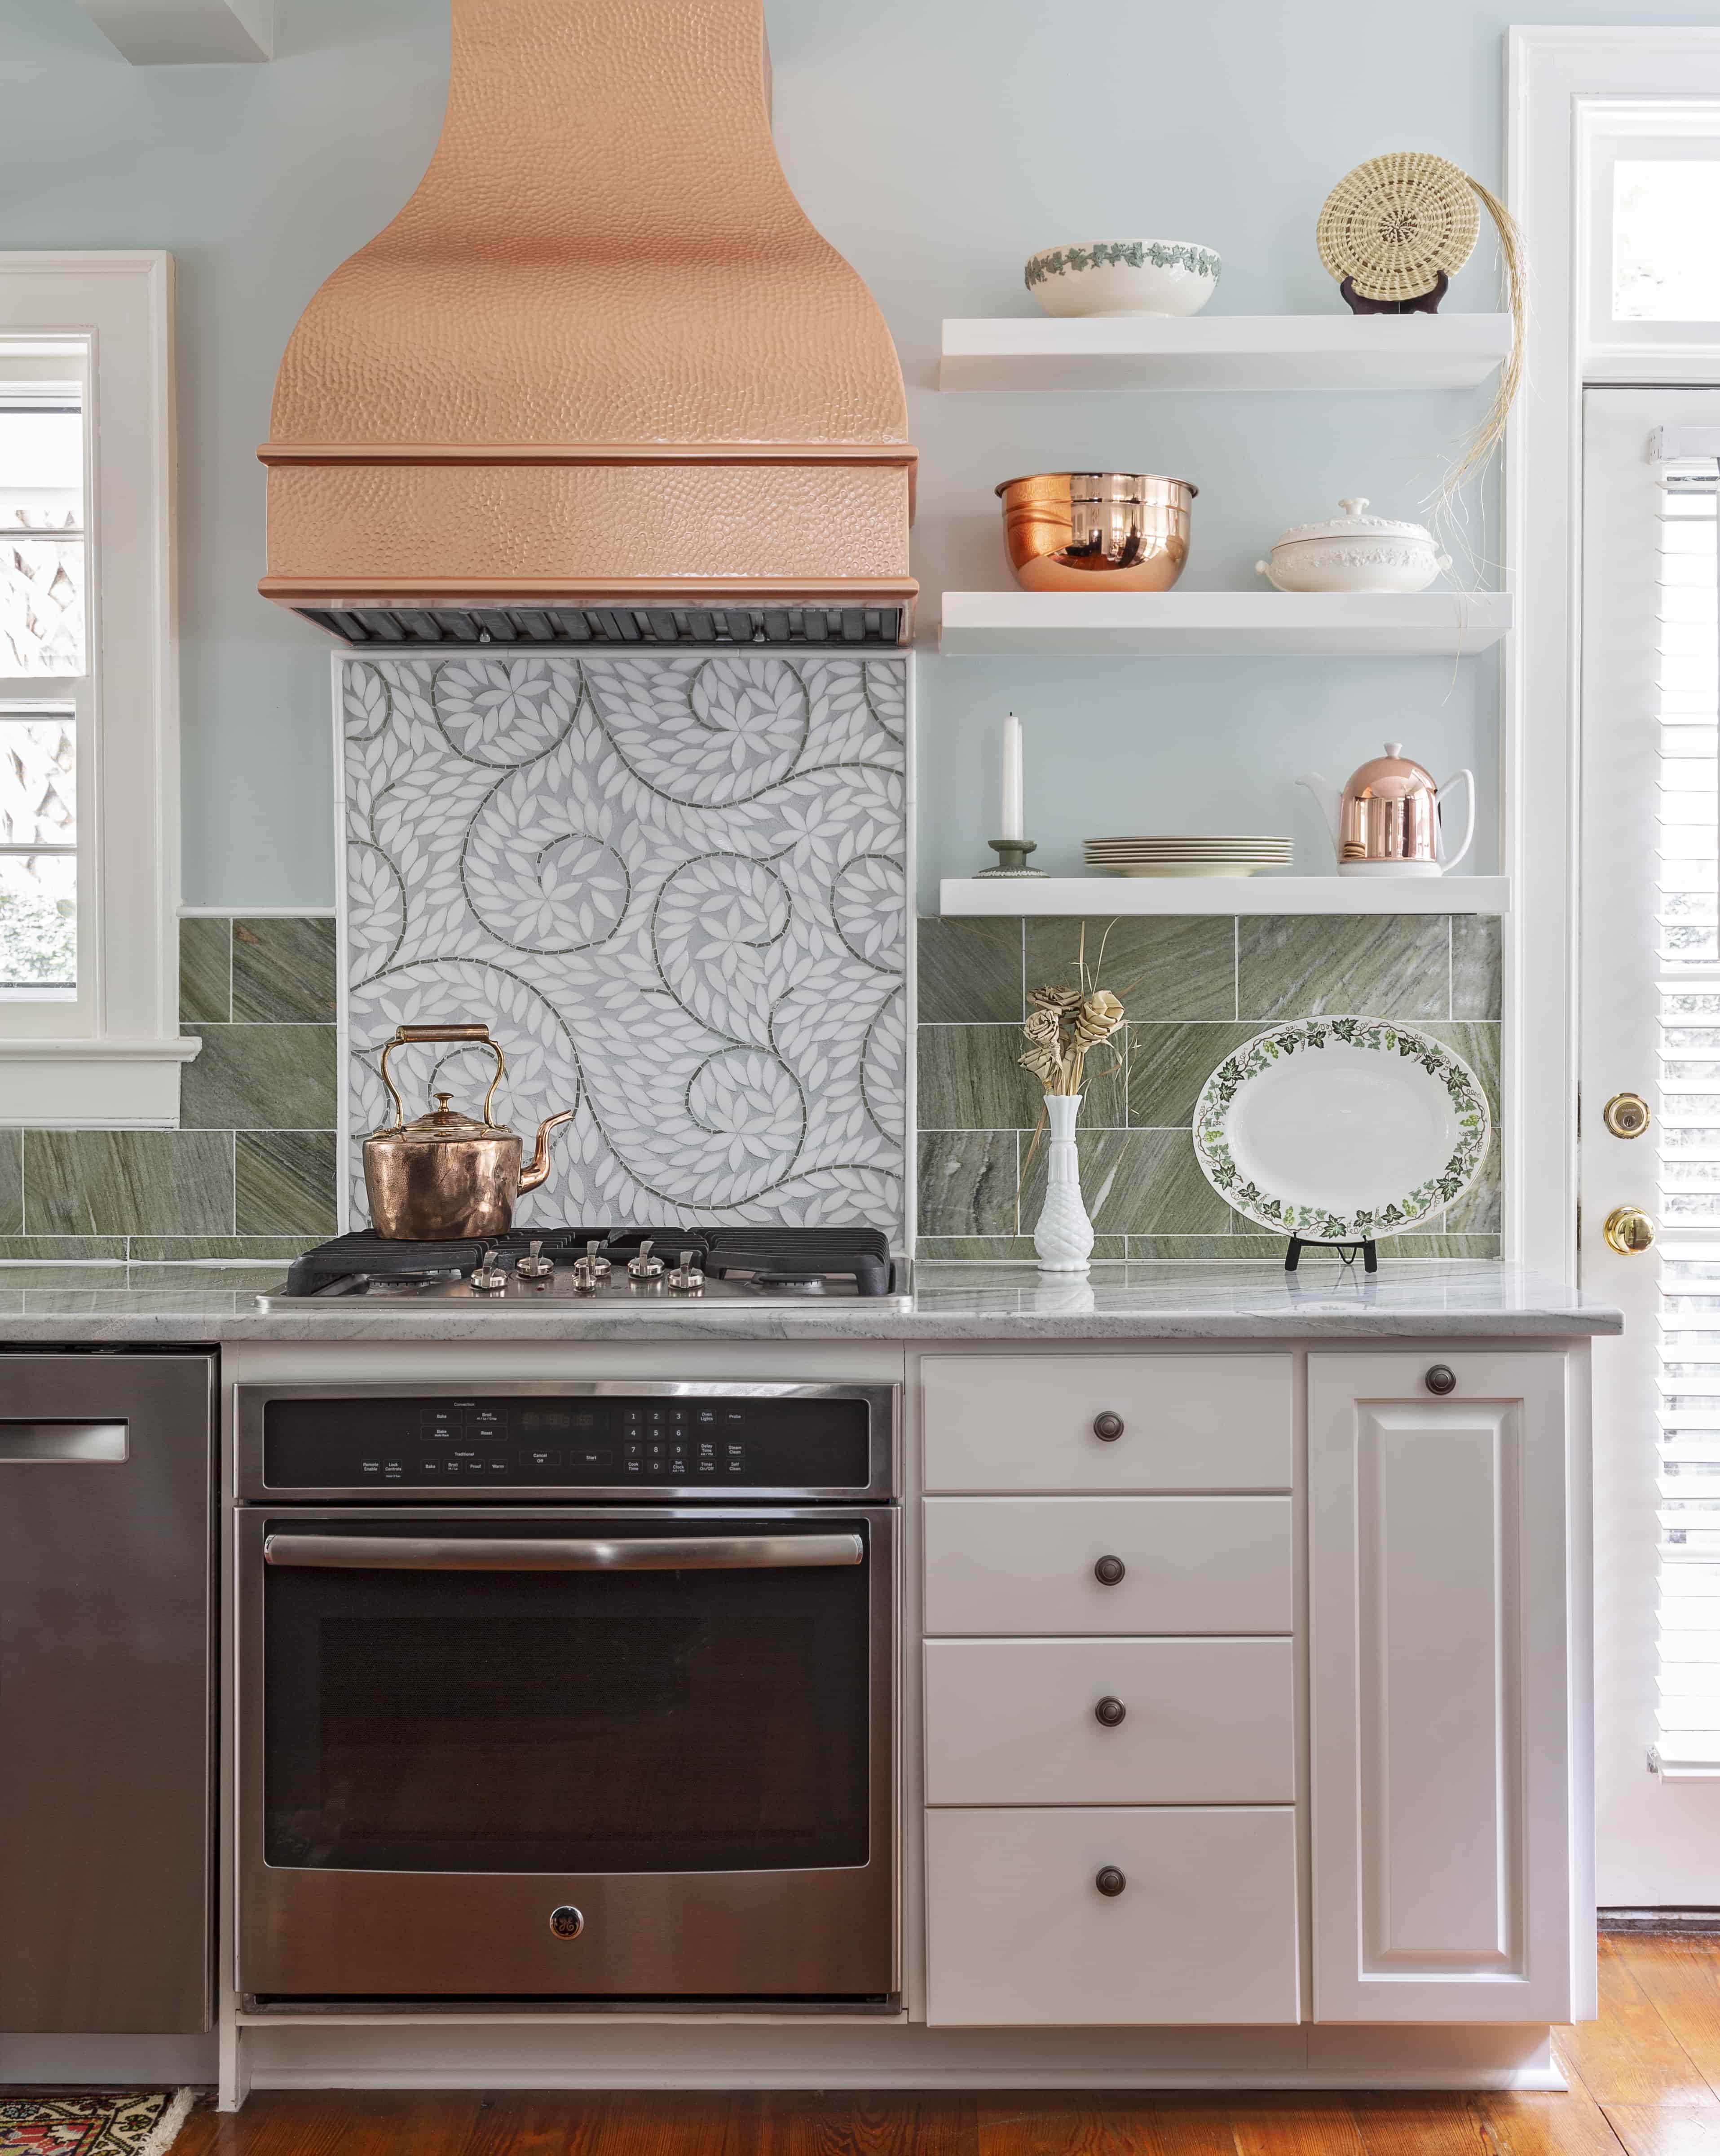 CopperSmith Artisan AT2 Wall Mount Copper Range Hood Antique Beehive Hammered in a coastal style kitchen with marble countertops white tile backsplash and white cabinetry